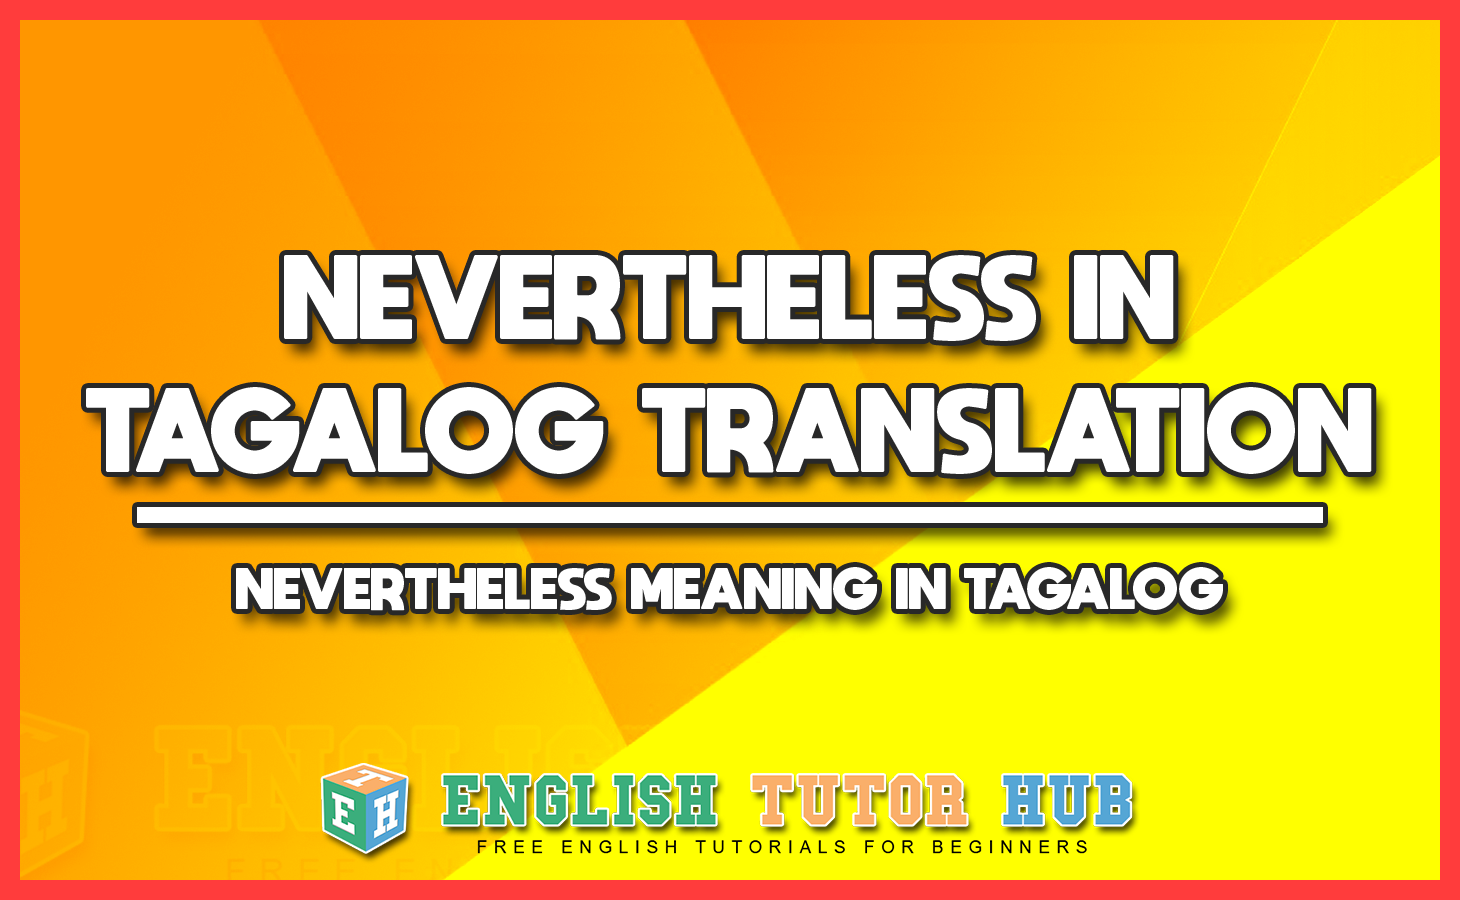 NEVERTHELESS IN TAGALOG TRANSLATION - NEVERTHELESS MEANING IN TAGALOG